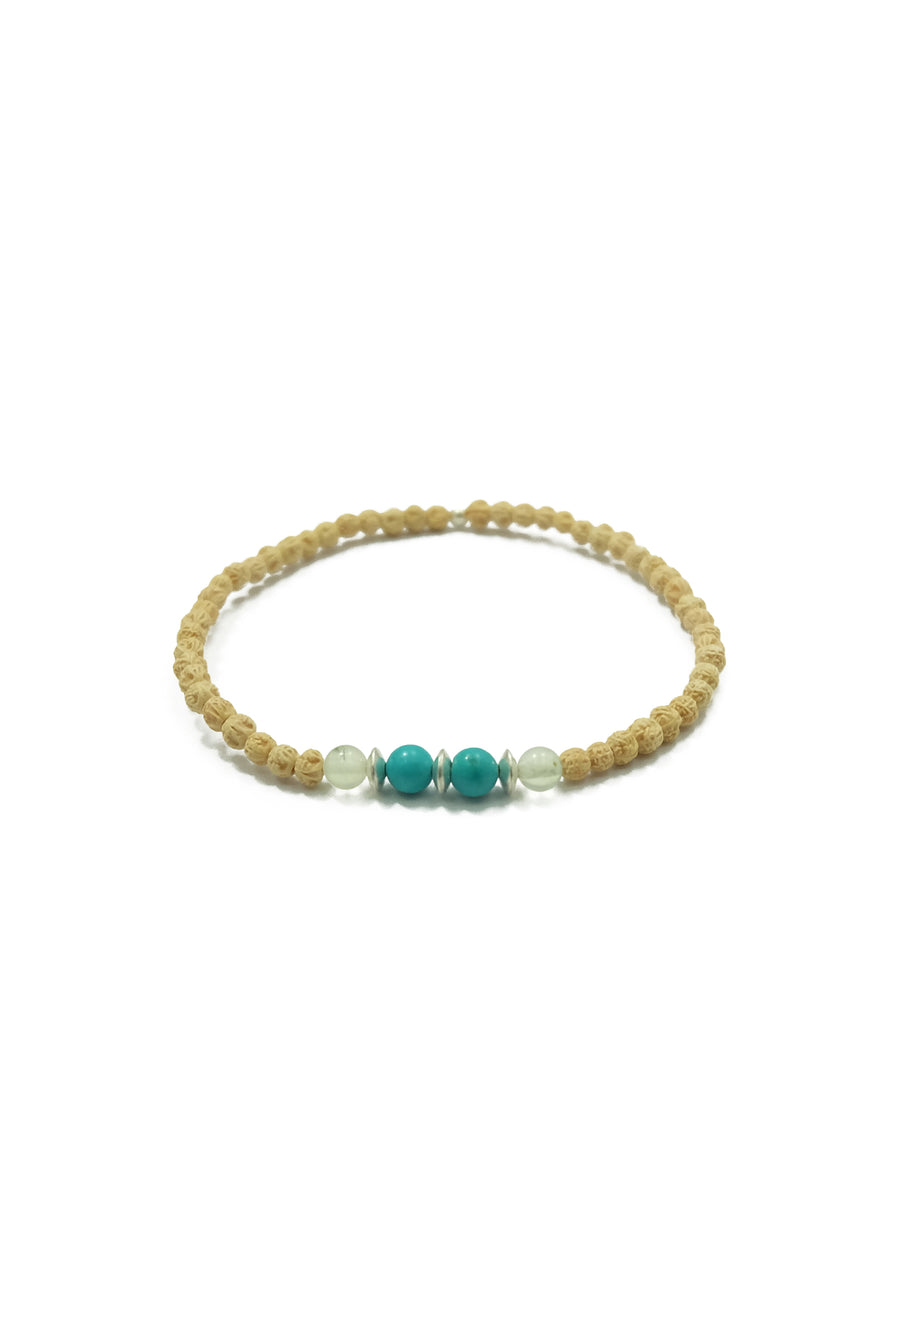  A captivating Lanikai Bracelet, designed to pair perfectly with the Lanikai Sunrise Mala Necklace. The bracelet features delicate 2mm prehnite, turquoise, and rudrani beads, accented with silver details. Immerse yourself in the blissful essence of weightlessly floating in aquamarine waves under the tropical sun with this enchanting accessory.